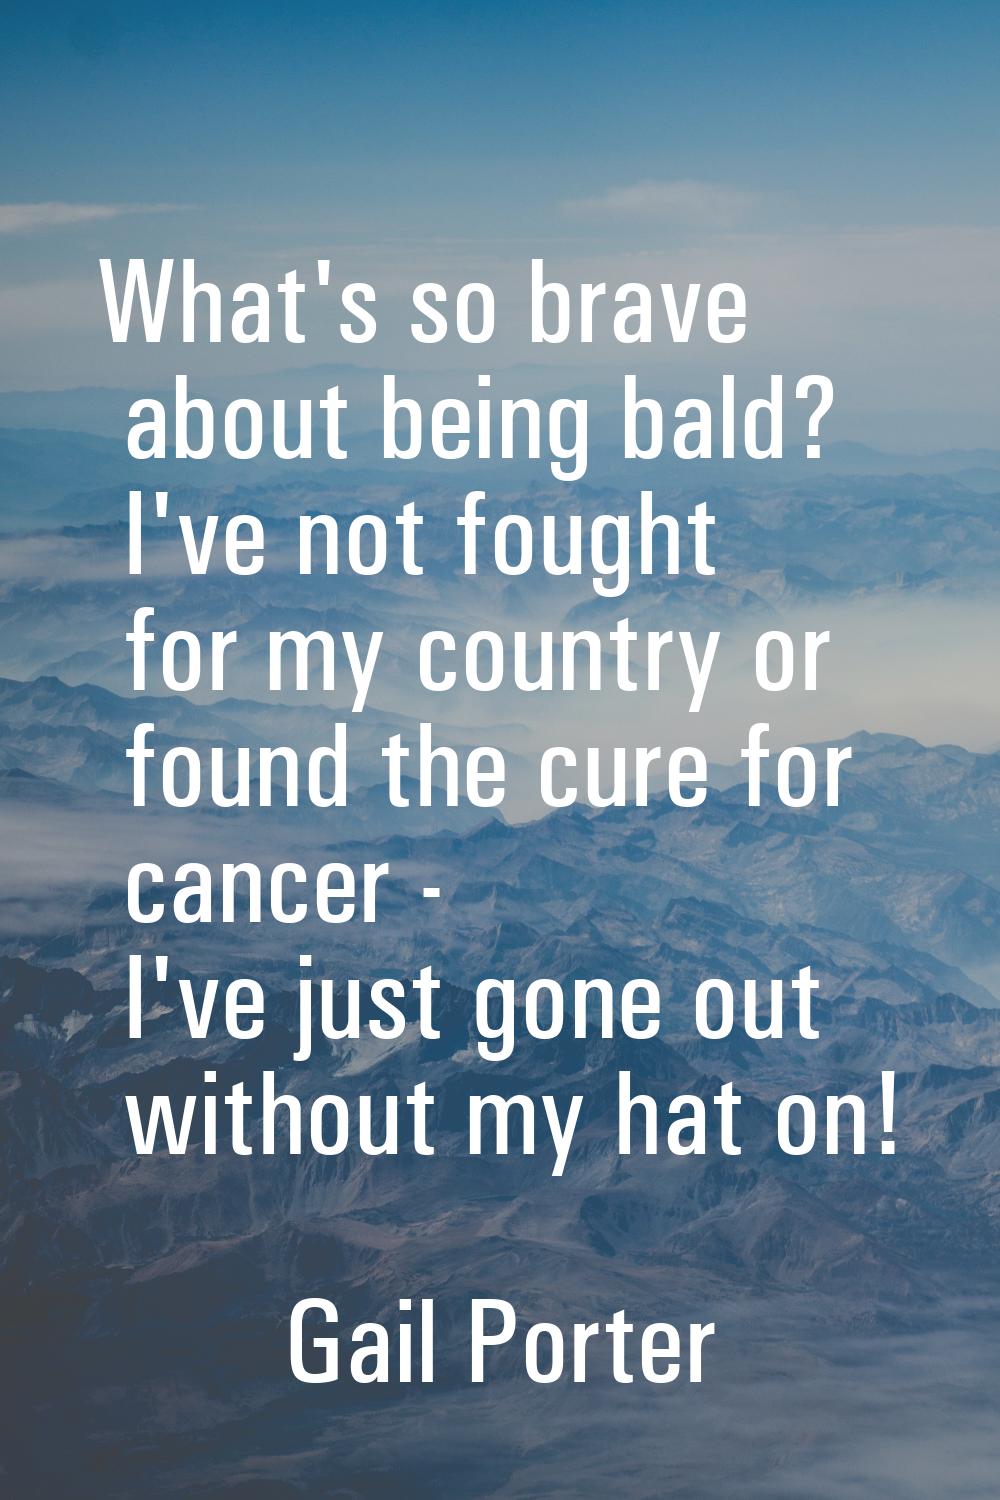 What's so brave about being bald? I've not fought for my country or found the cure for cancer - I'v